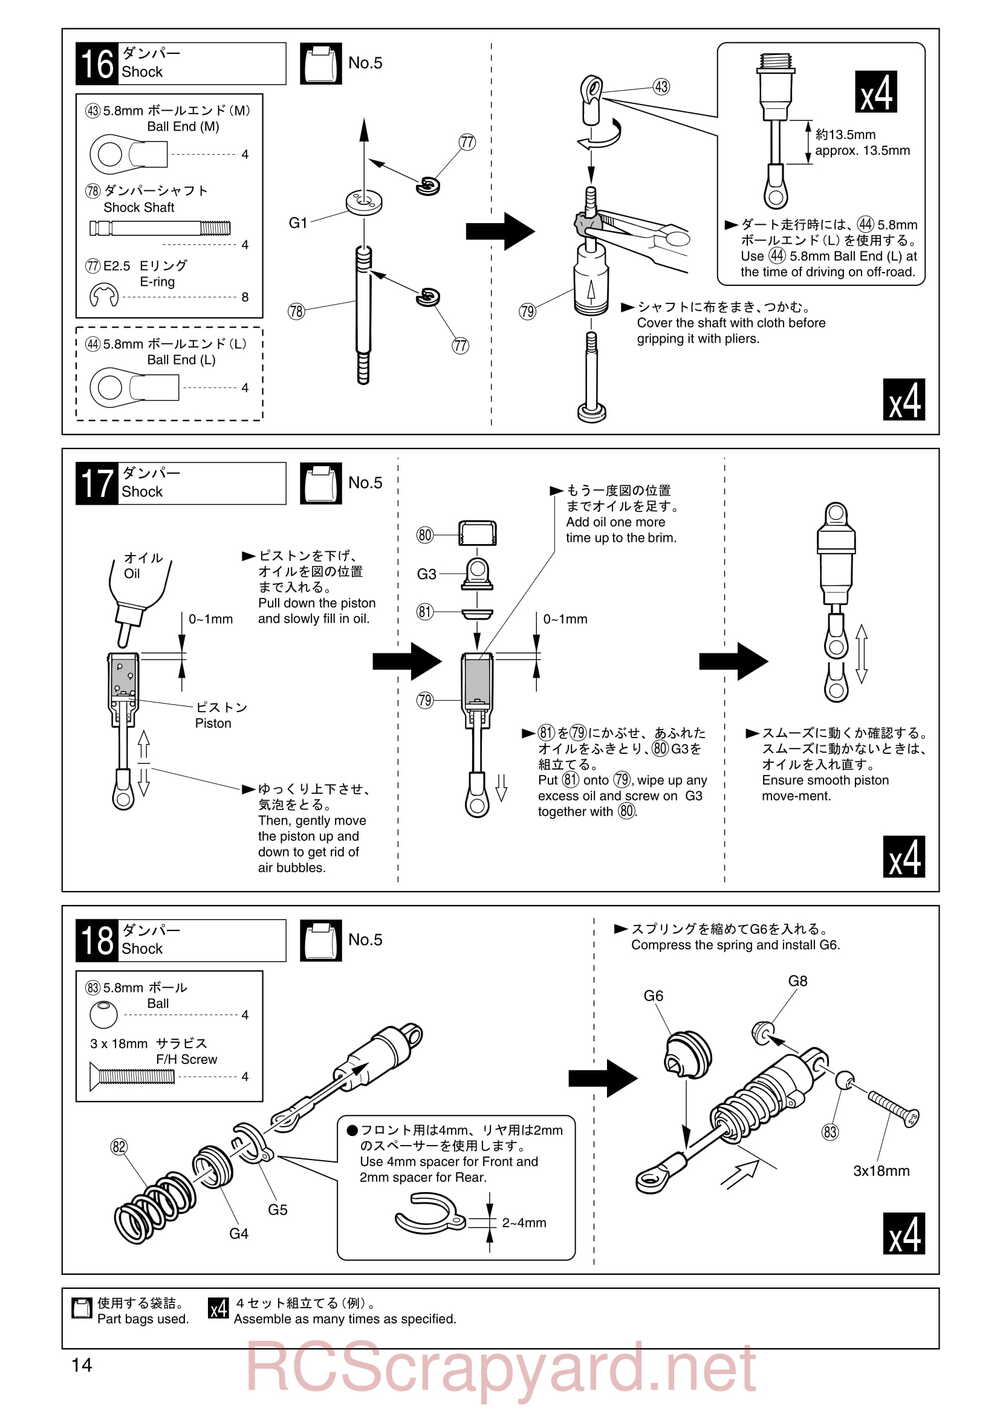 Kyosho - 31061 - TR-15 Rally - Manual - Page 14